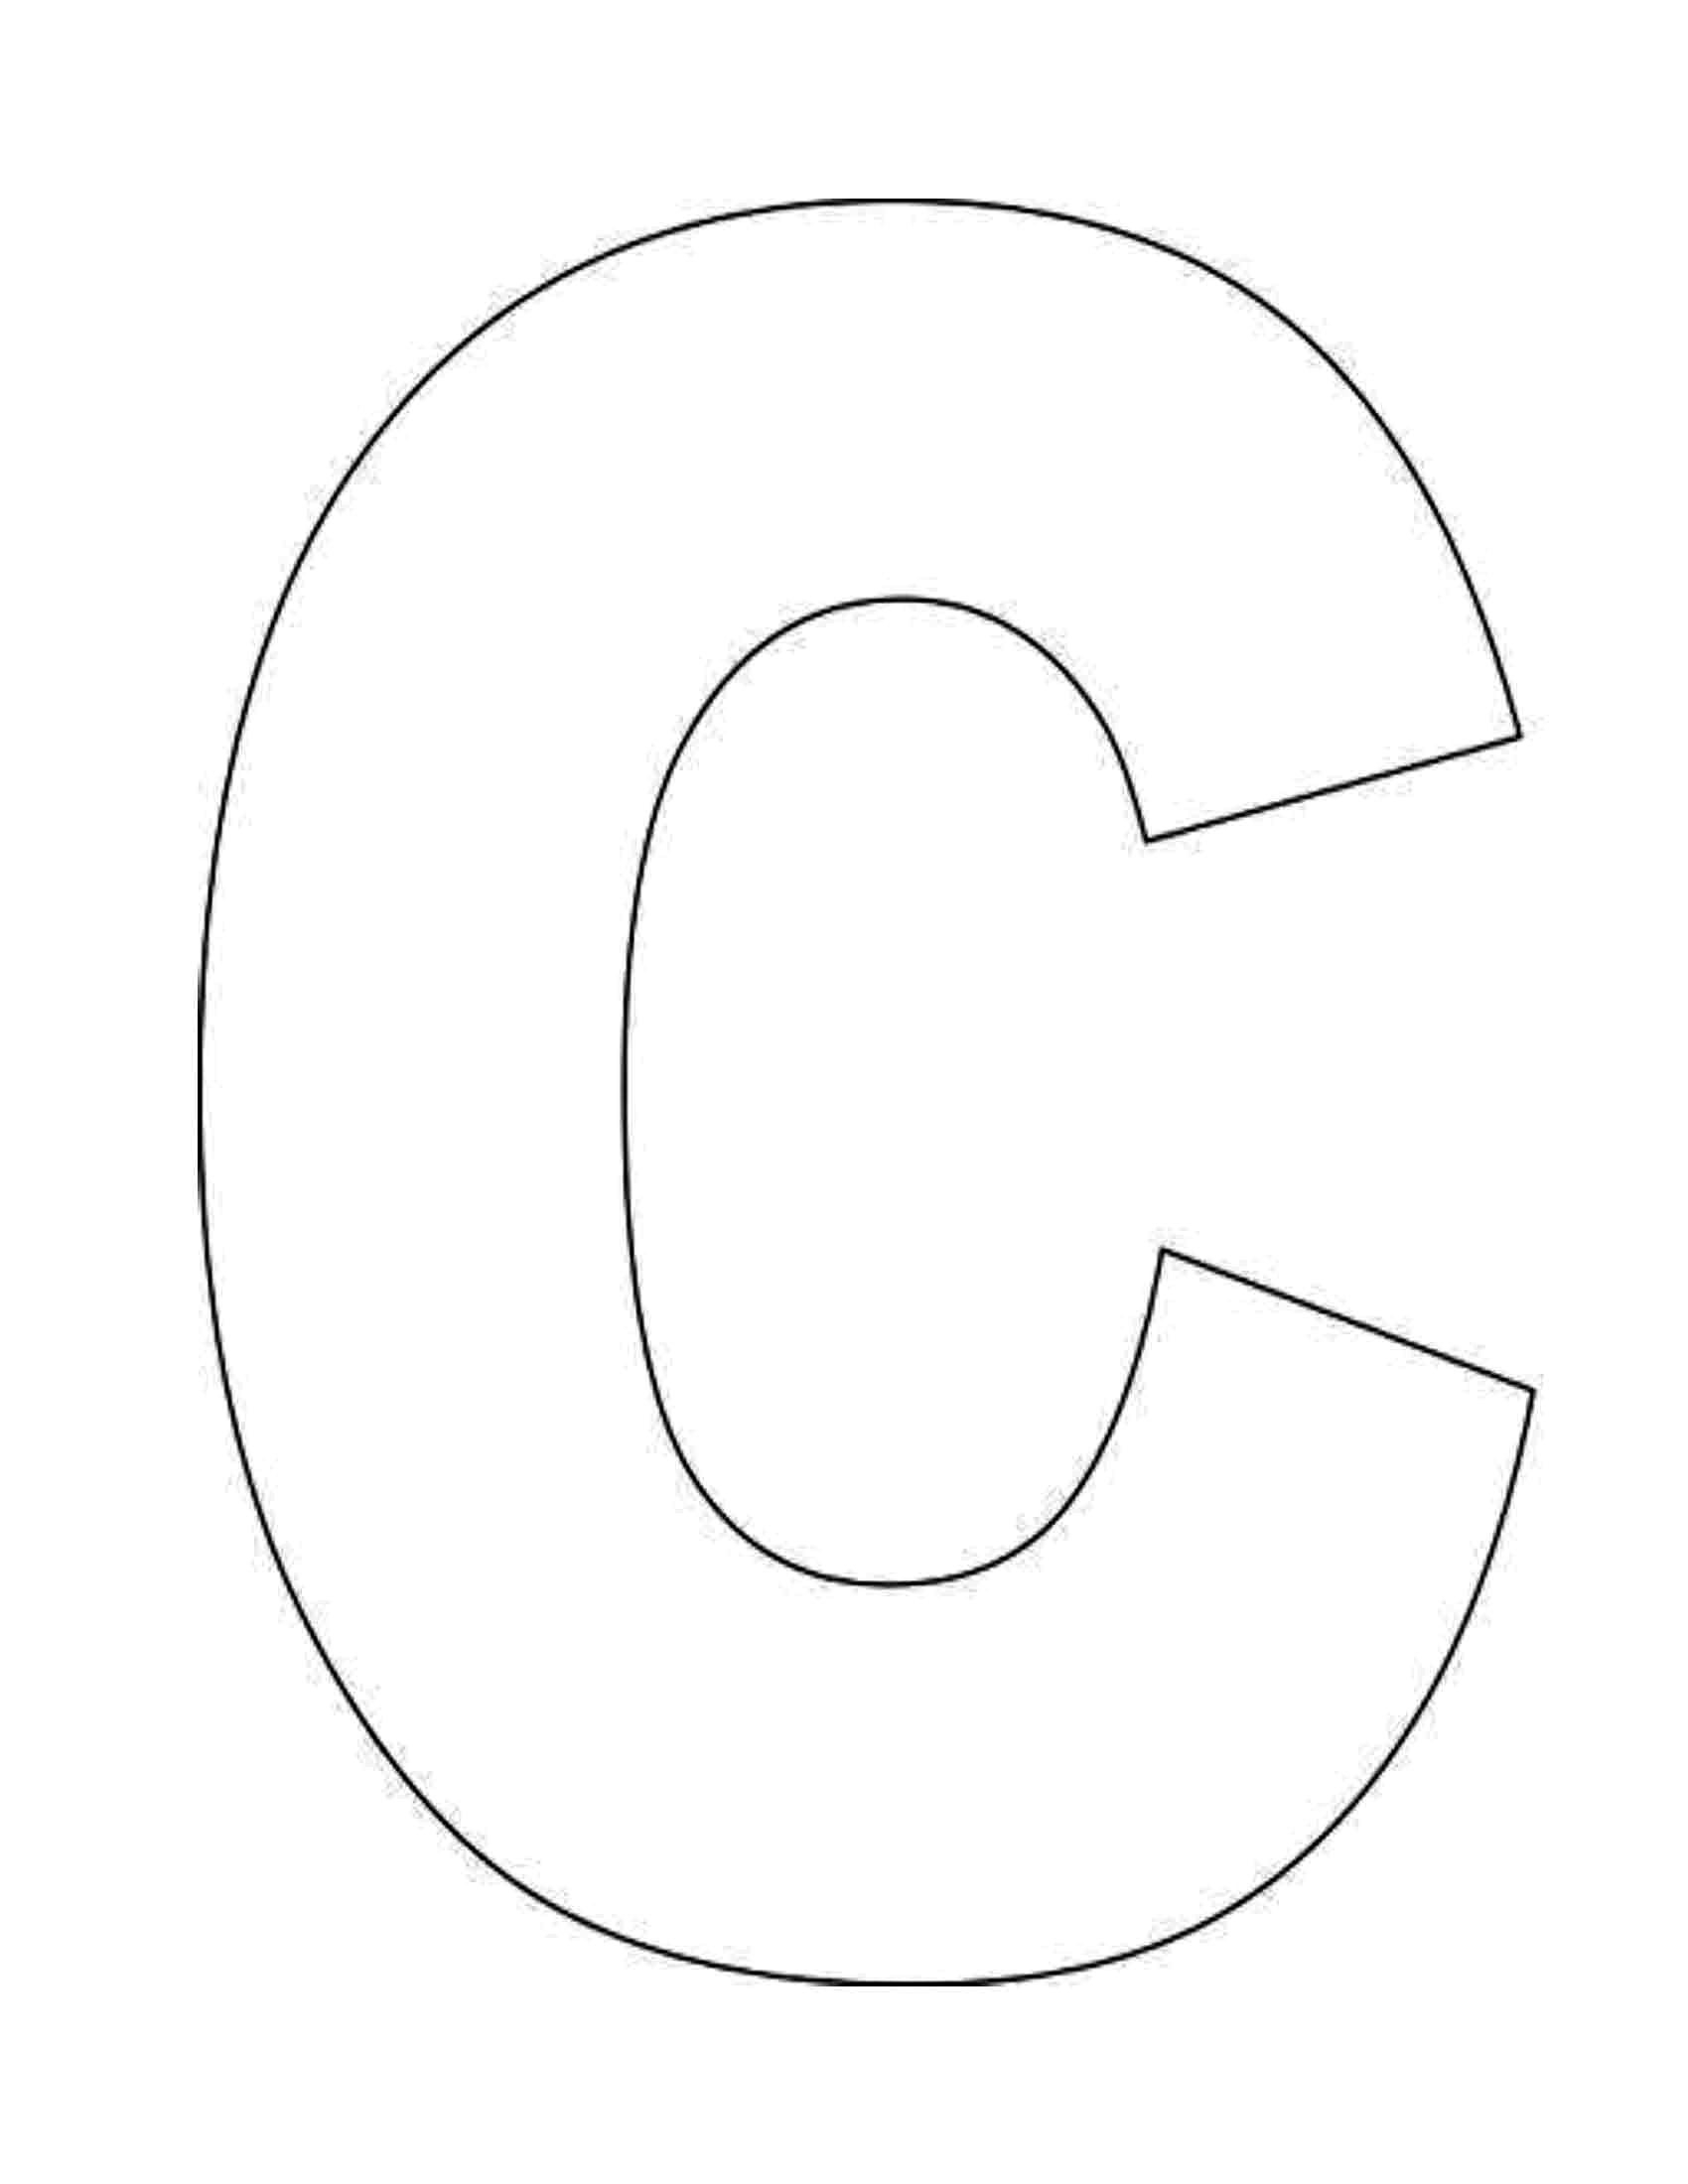 Download Or Print This Amazing Coloring Page Letter C Coloring Pages To Download And Print For Free